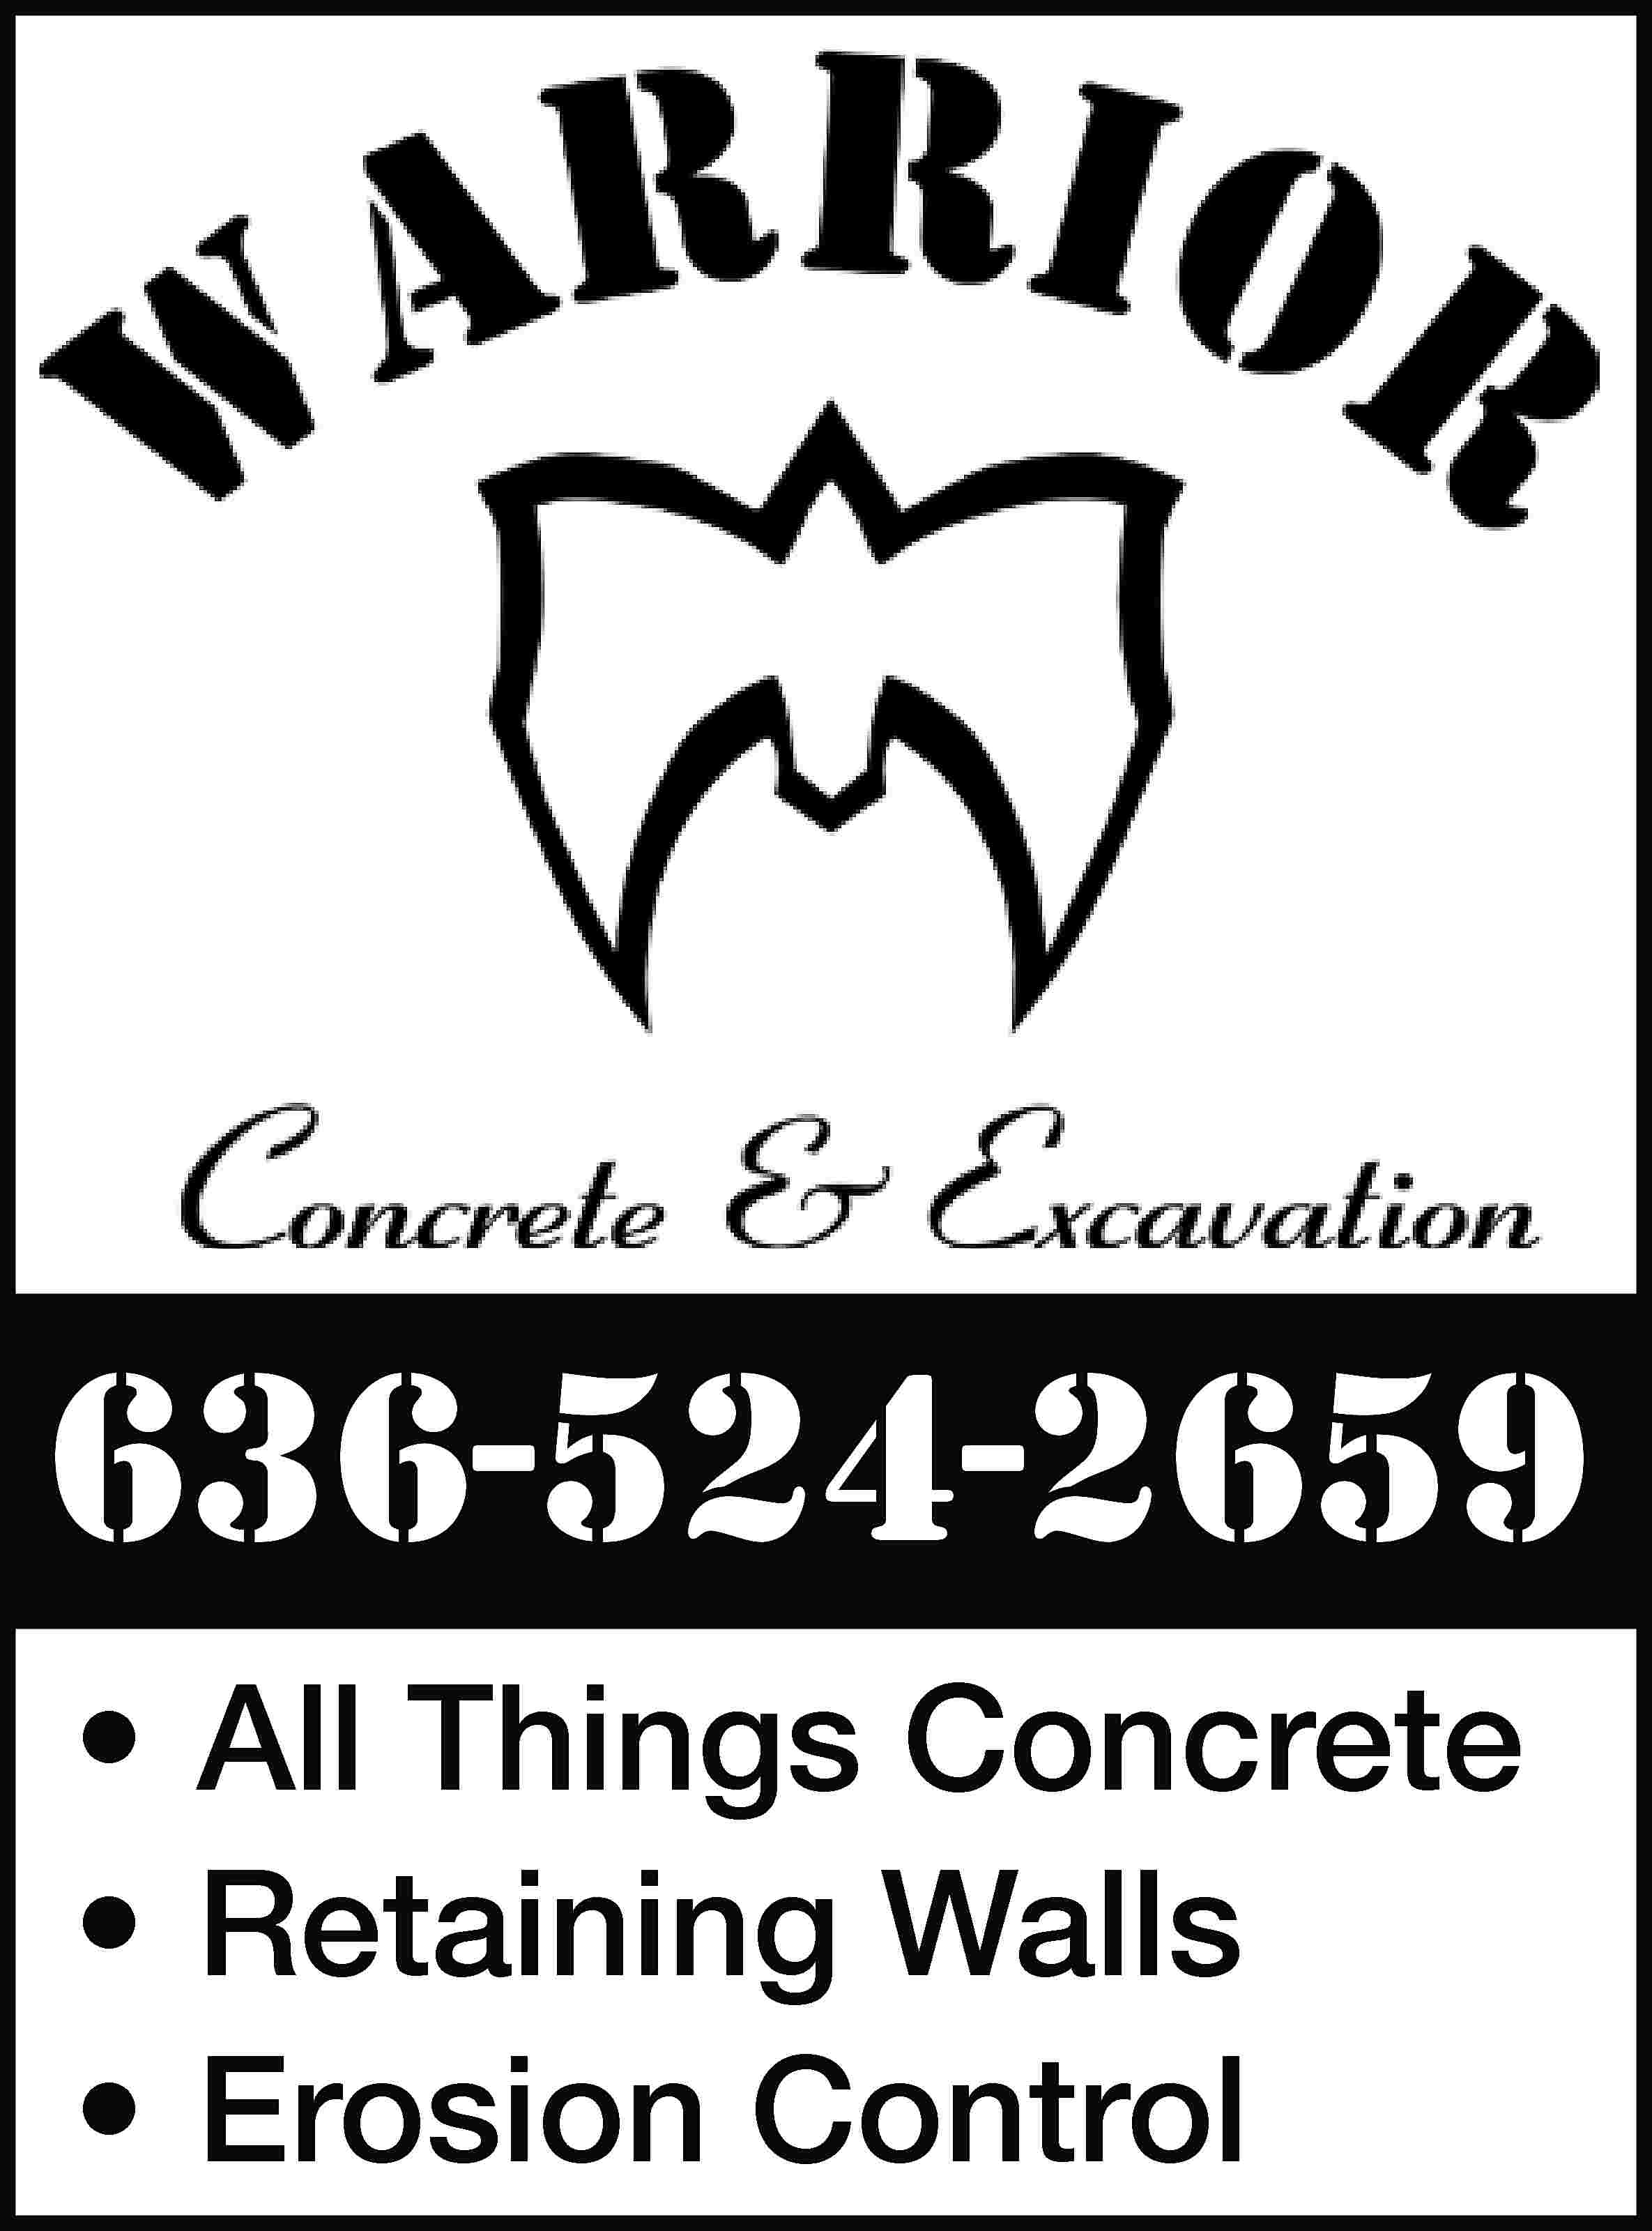 636-524-2659 • All Things Concrete  636-524-2659 • All Things Concrete • Retaining Walls • Erosion Control